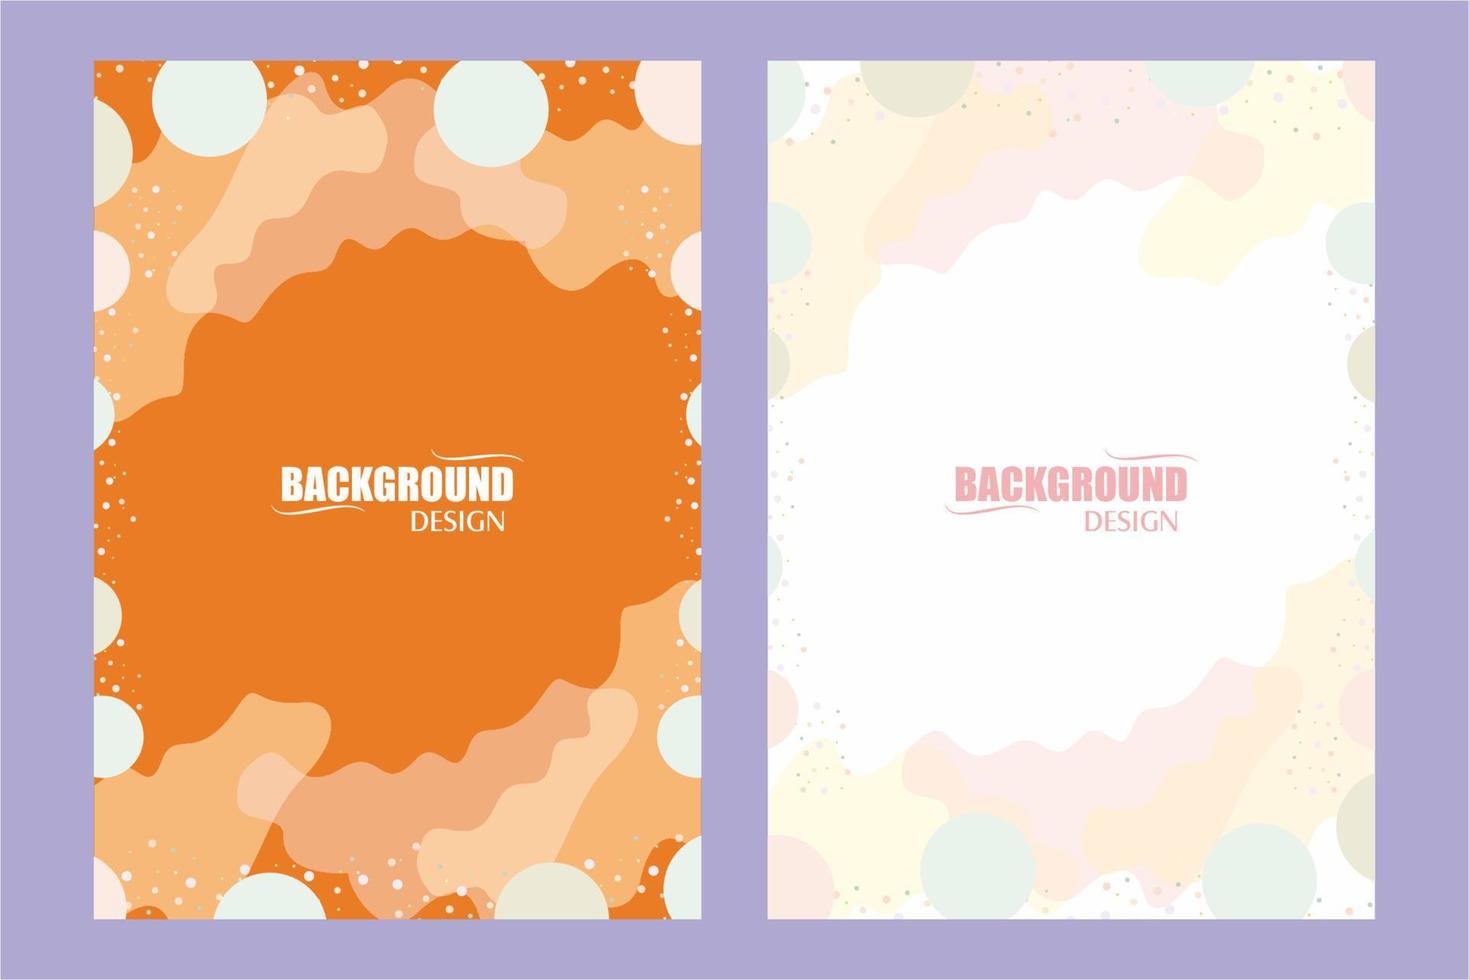 BACKGROUND DESIGN, COVER ABSTRACT, COVER DESIGN vector